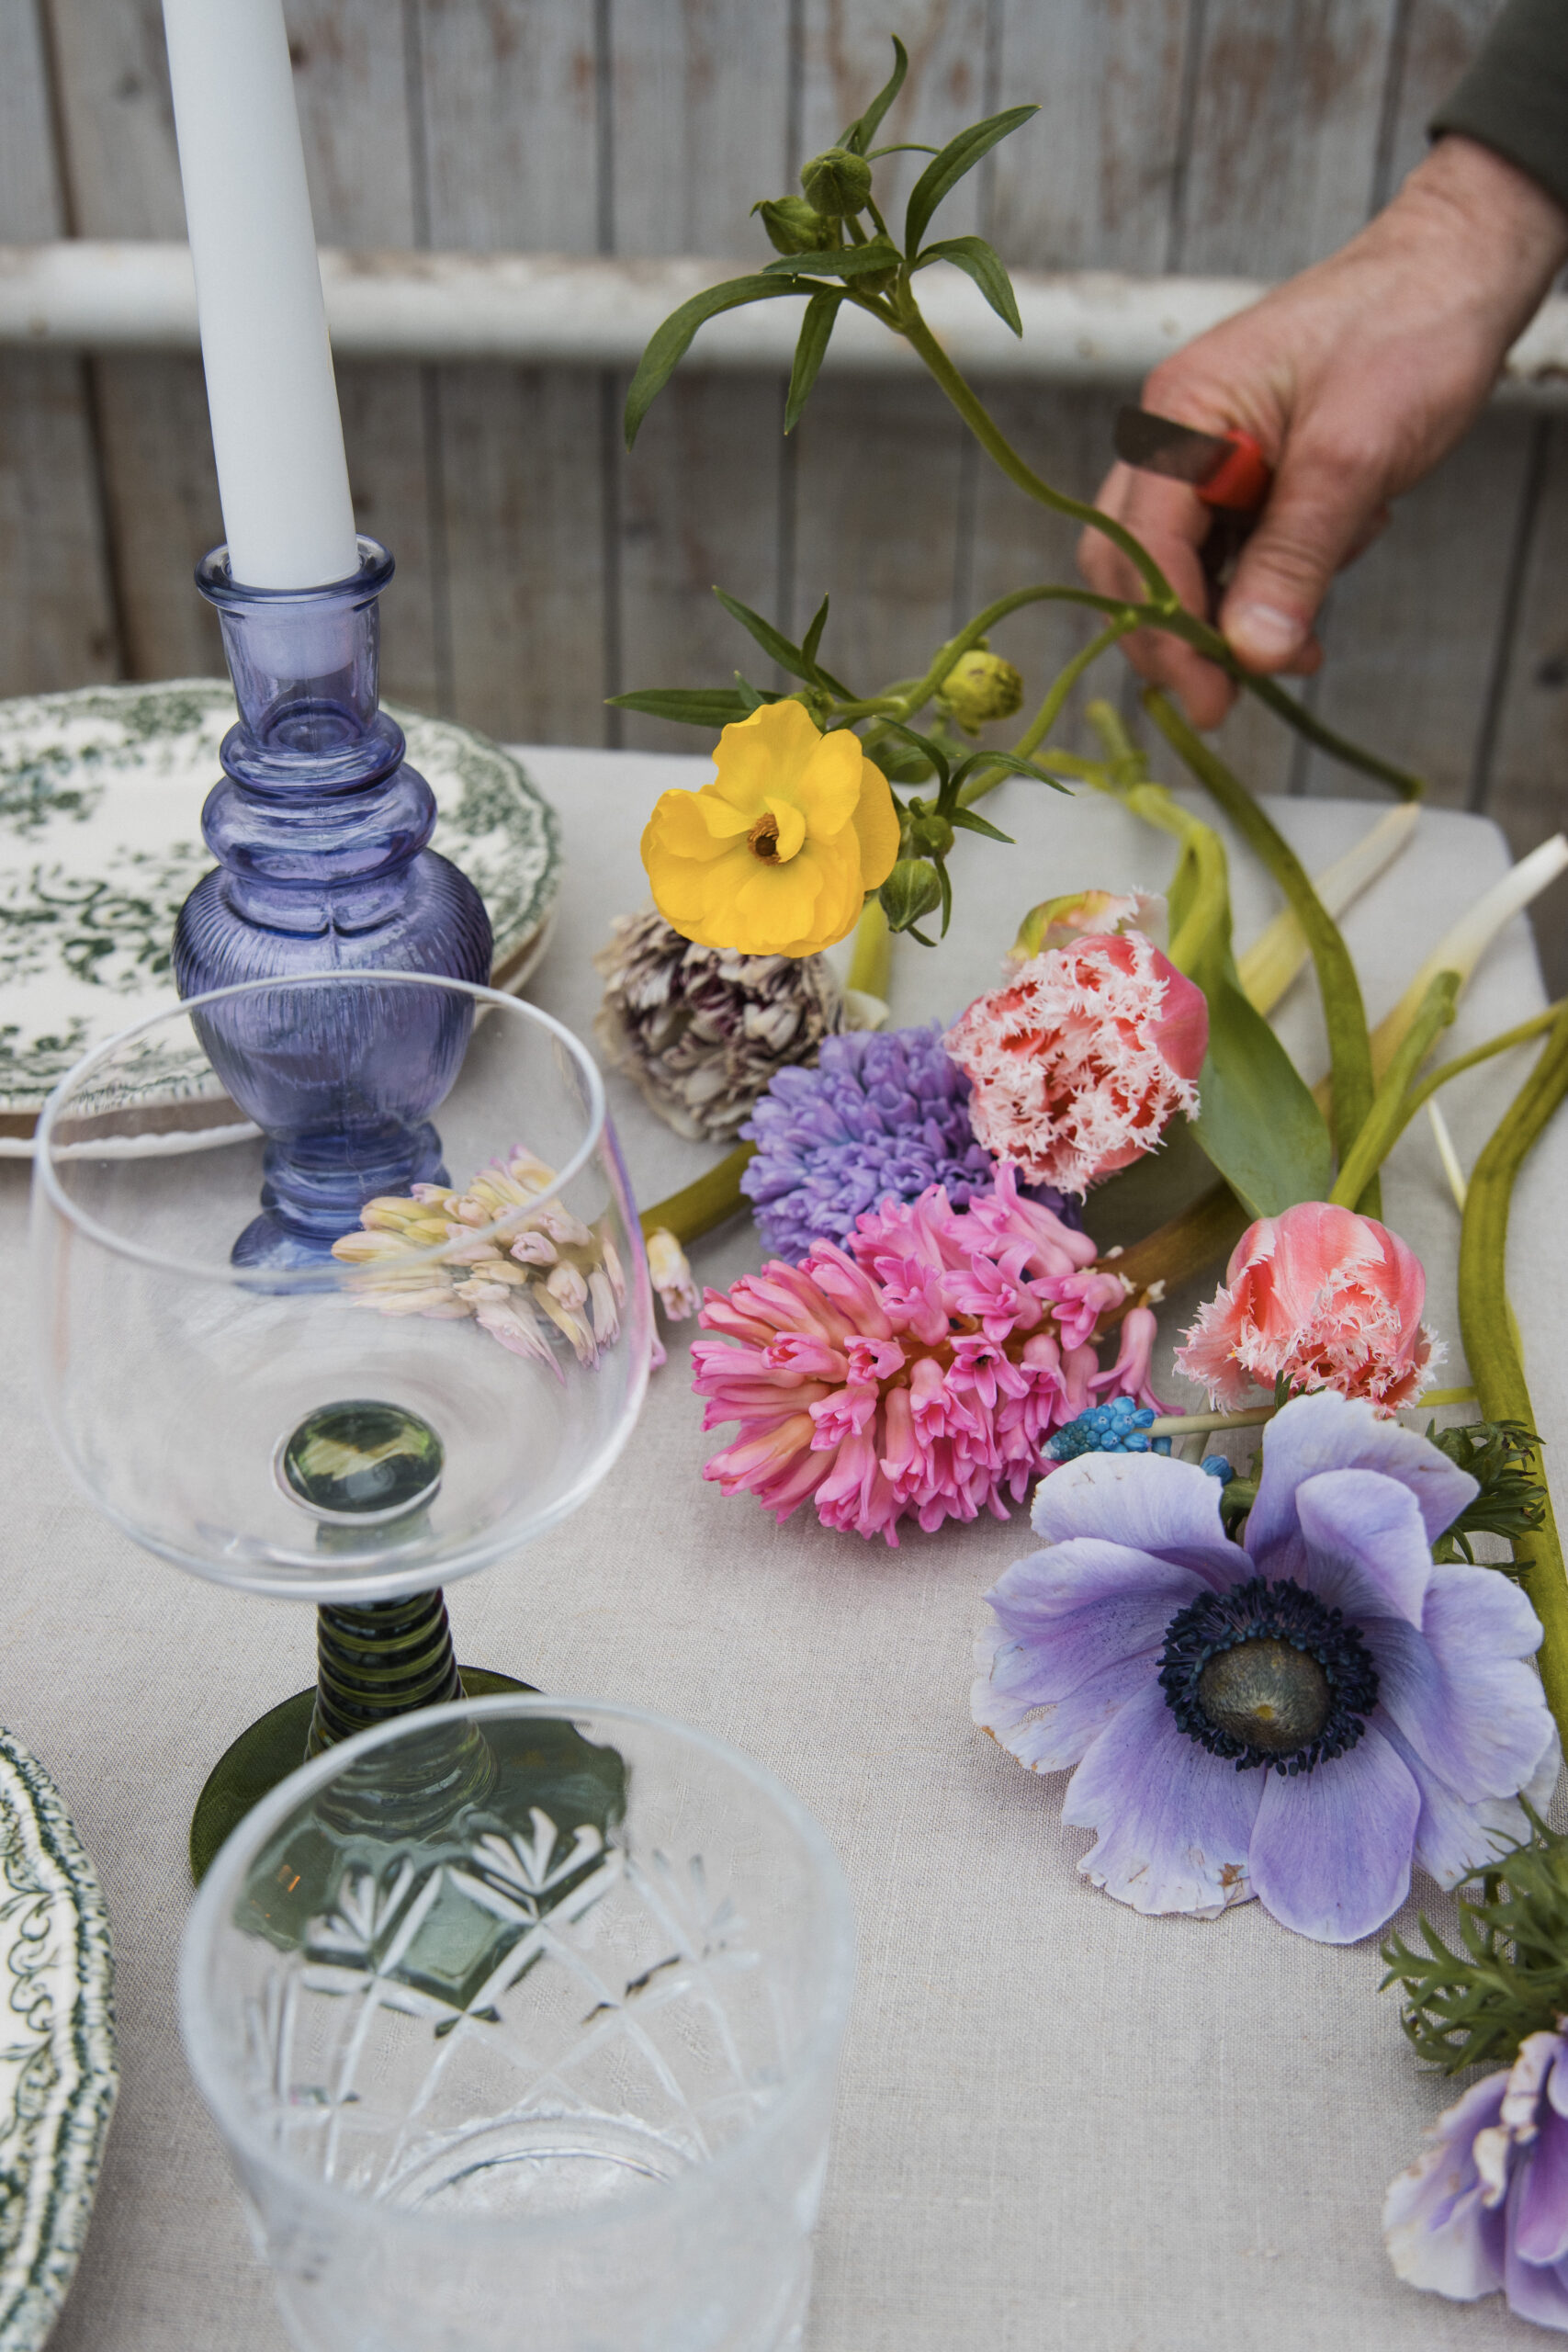 A radiant Easter at an enchanting Easter table